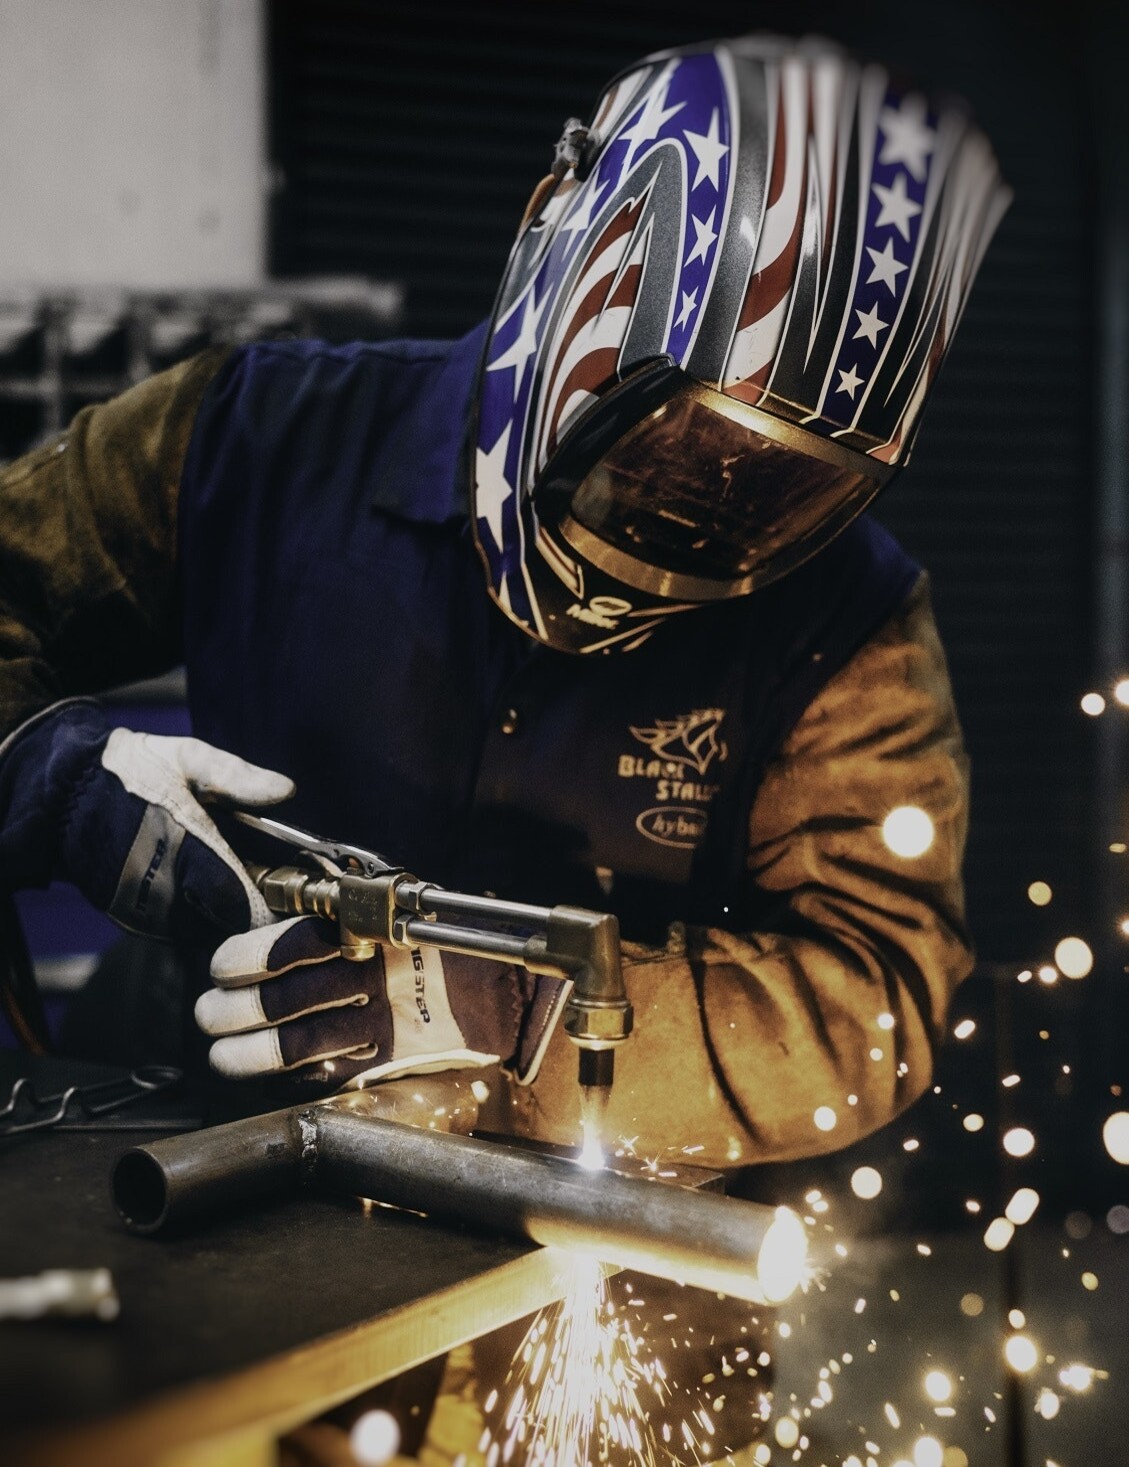 Person welding with safety gear on at Advanced Welding Institute